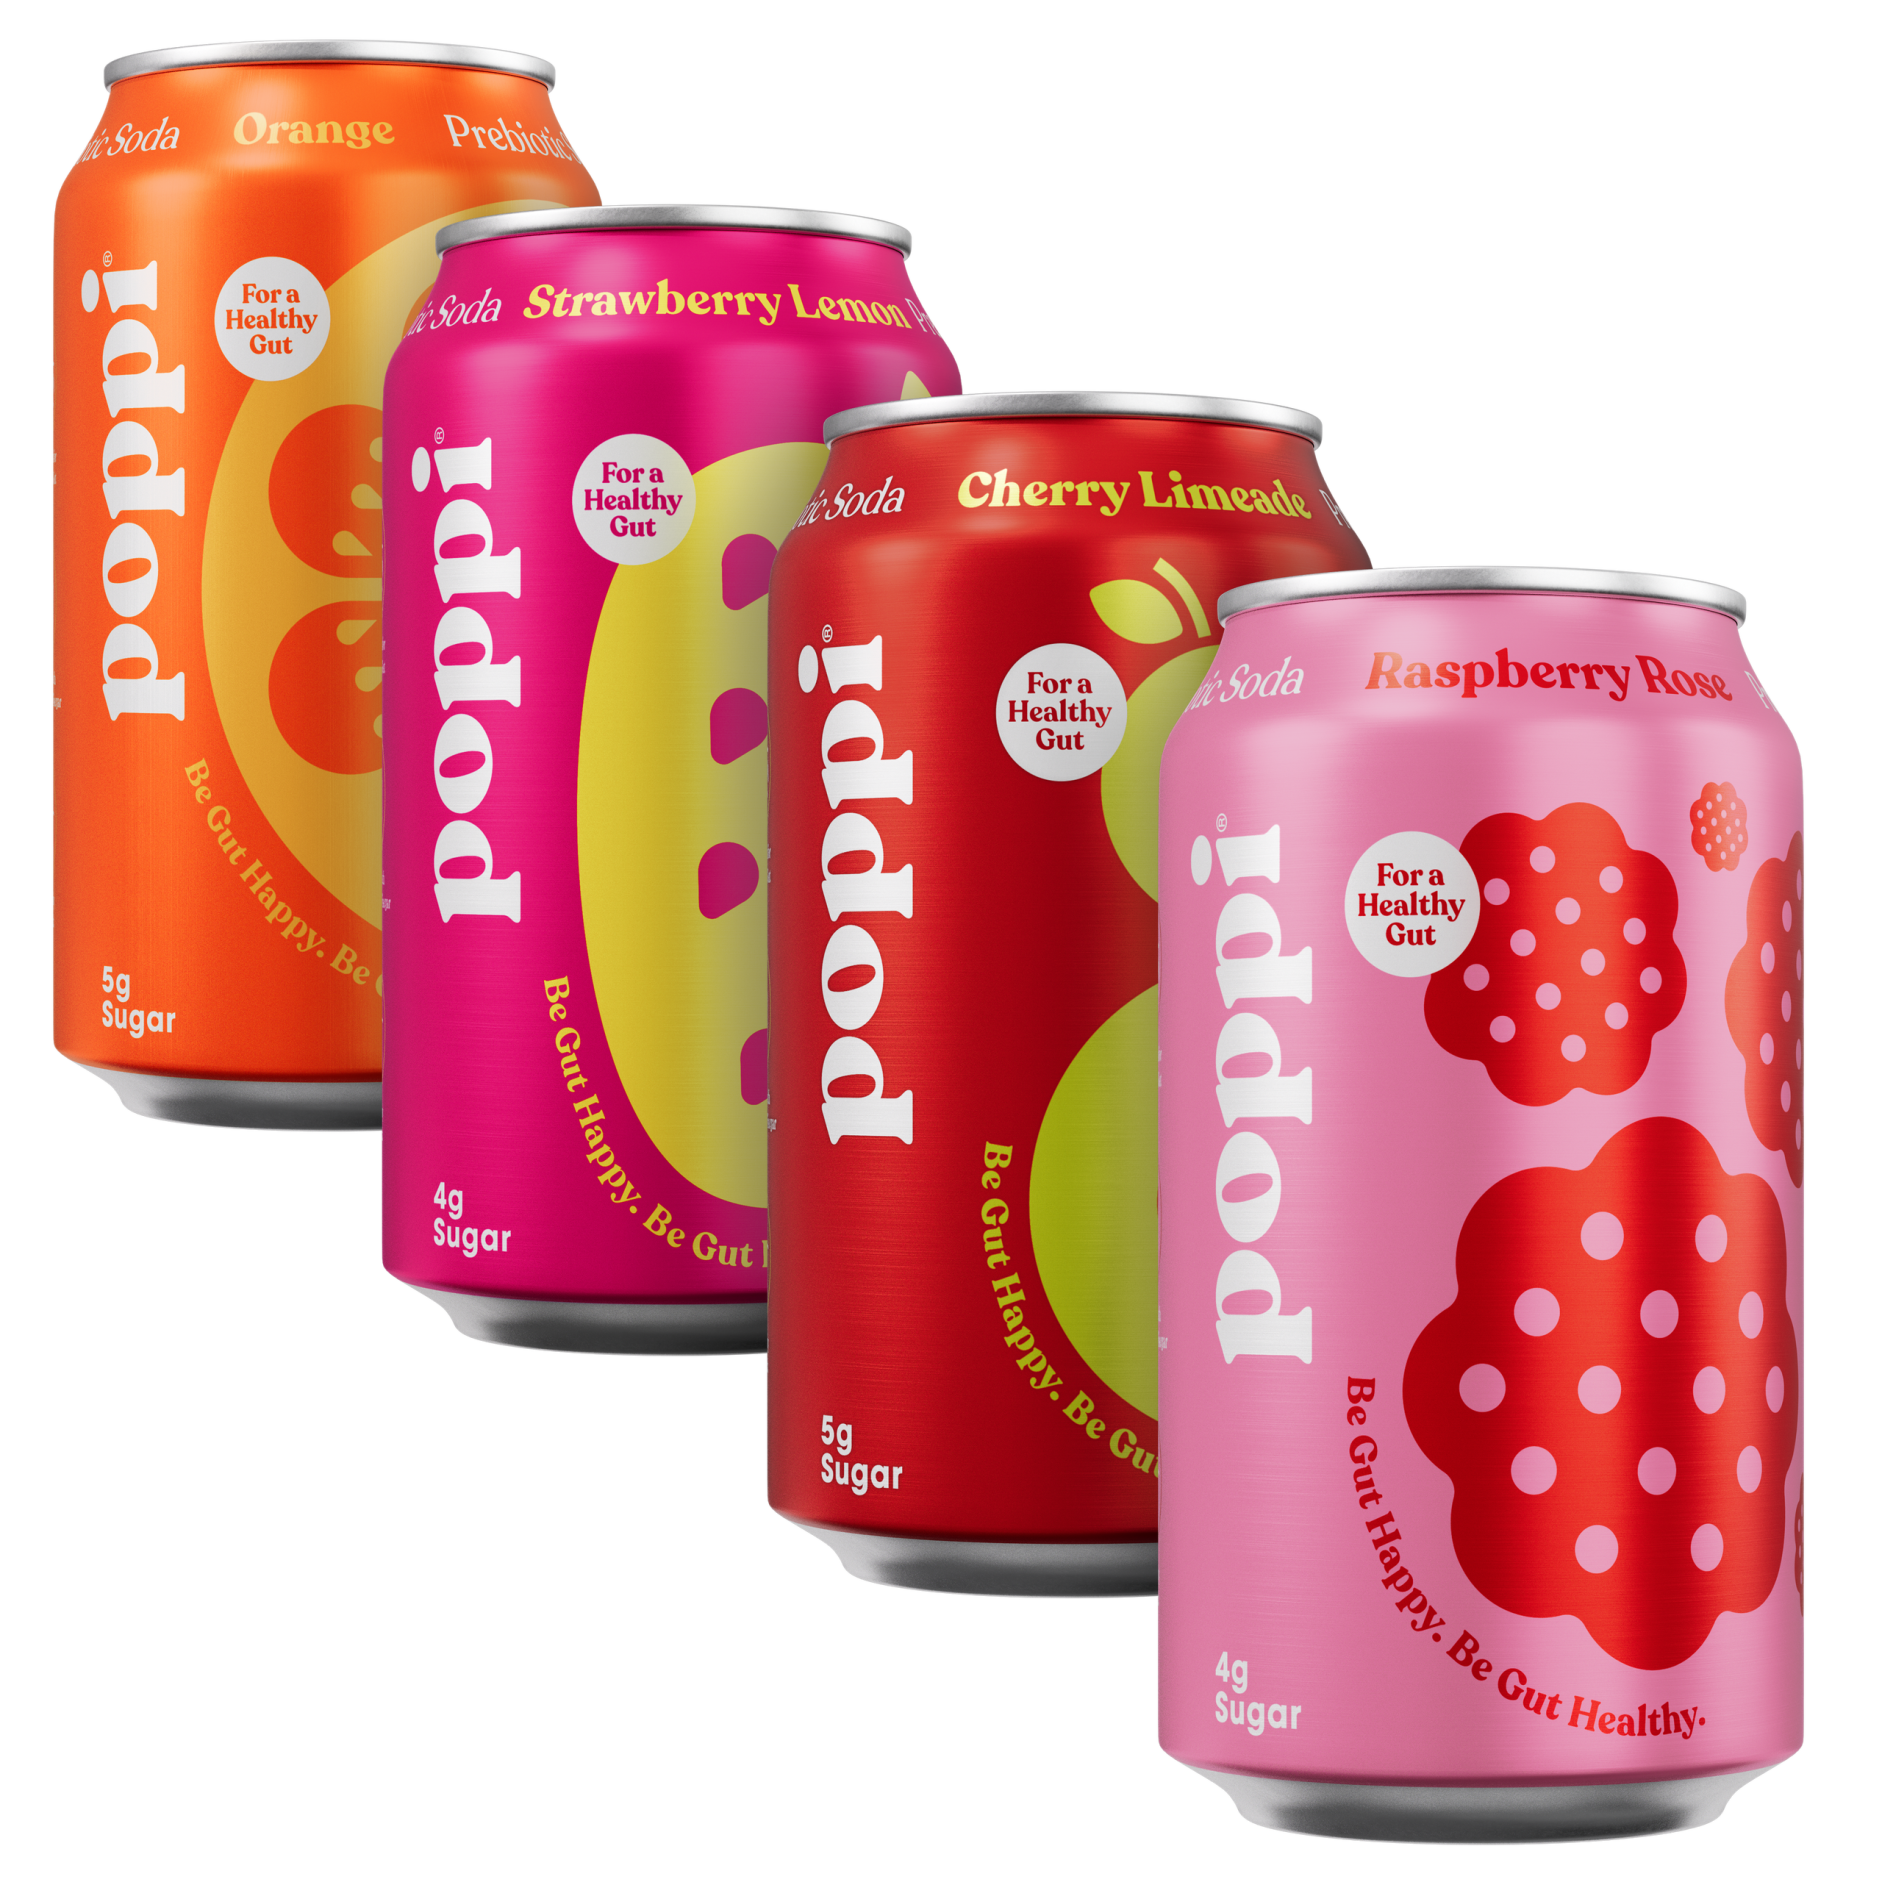 Four cans of Poppi prebiotic soda in assorted flavors